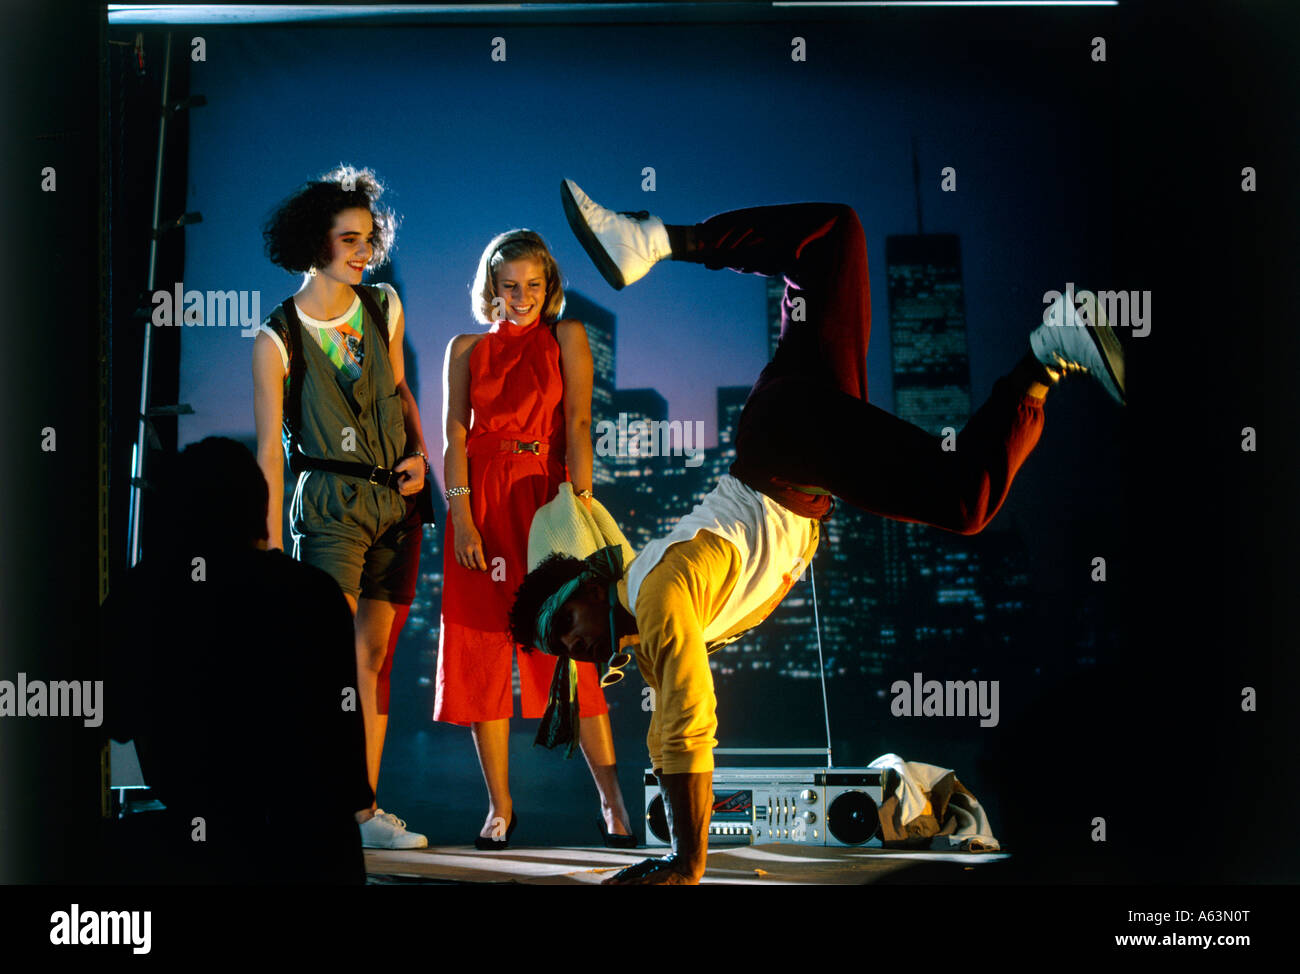 teenagers posing for photo shooting scenery of new york feeling breakdance lifestyle editorial use only Stock Photo